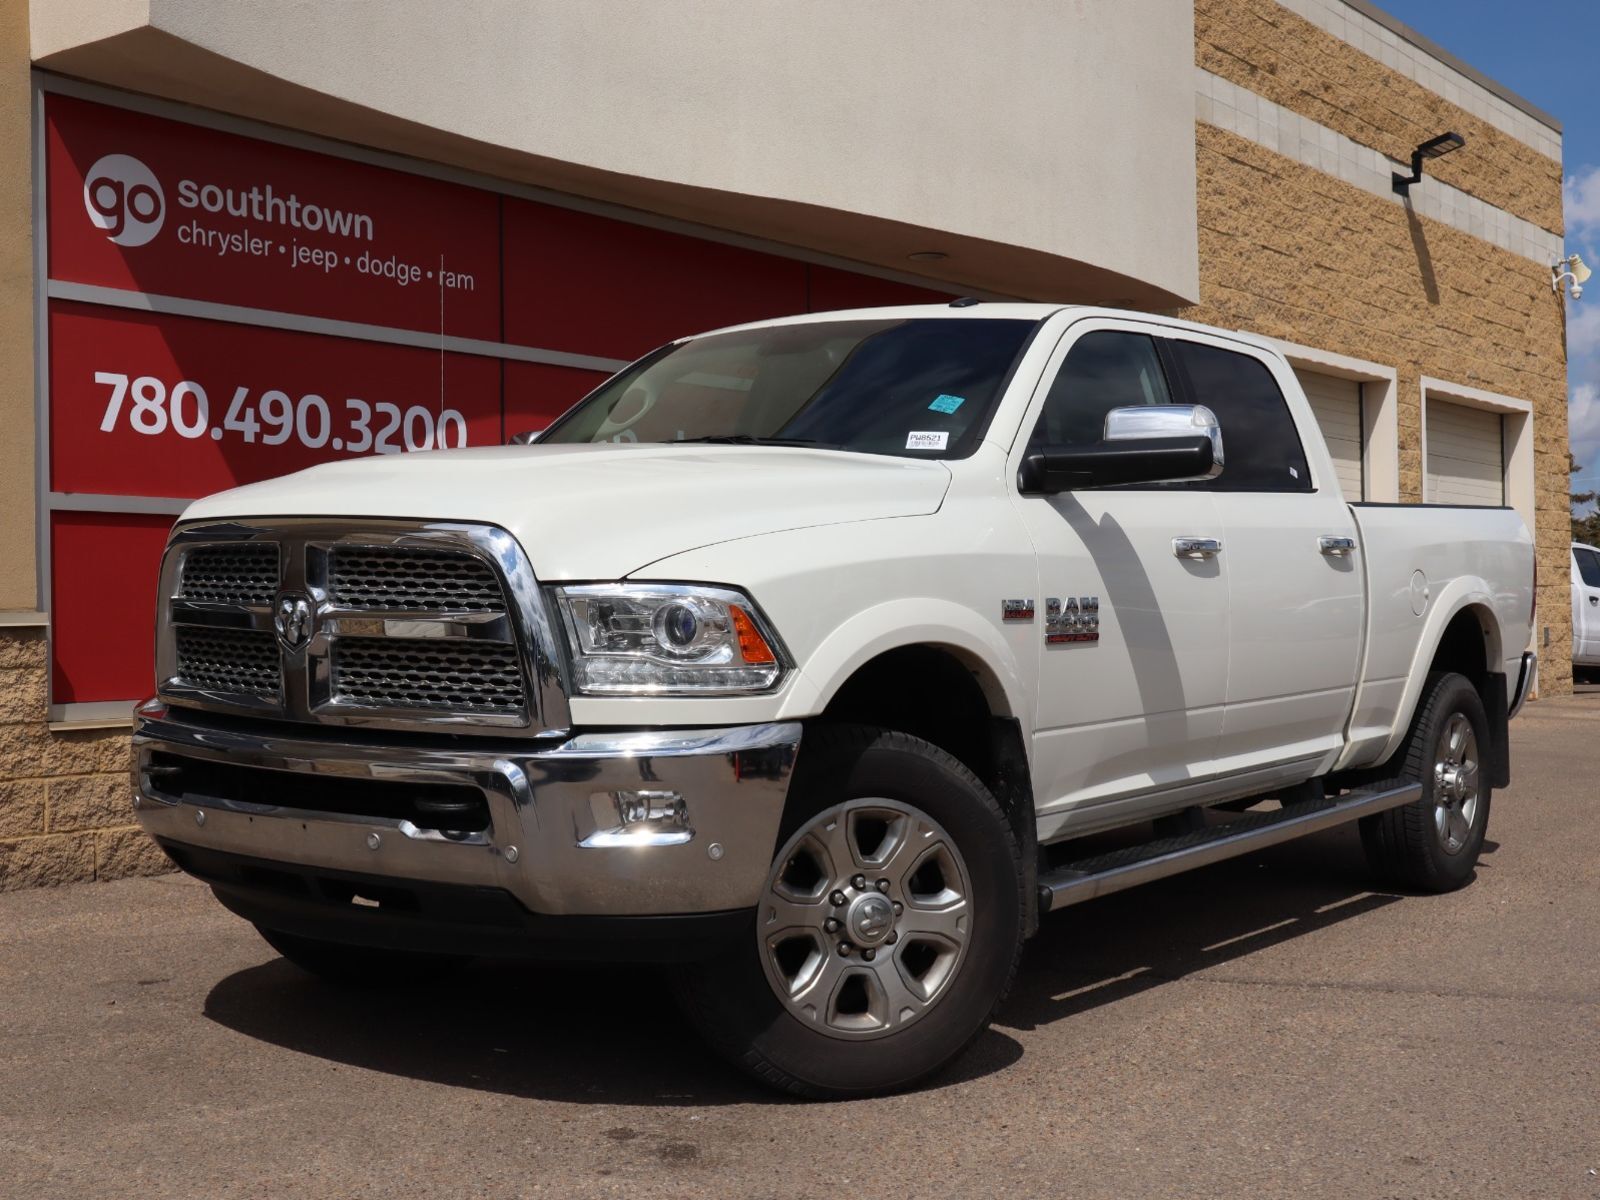 2017 Ram 2500 LARAMIE IN PEARL WHITE EQUIPPED WITH A 6.4L HEMI V